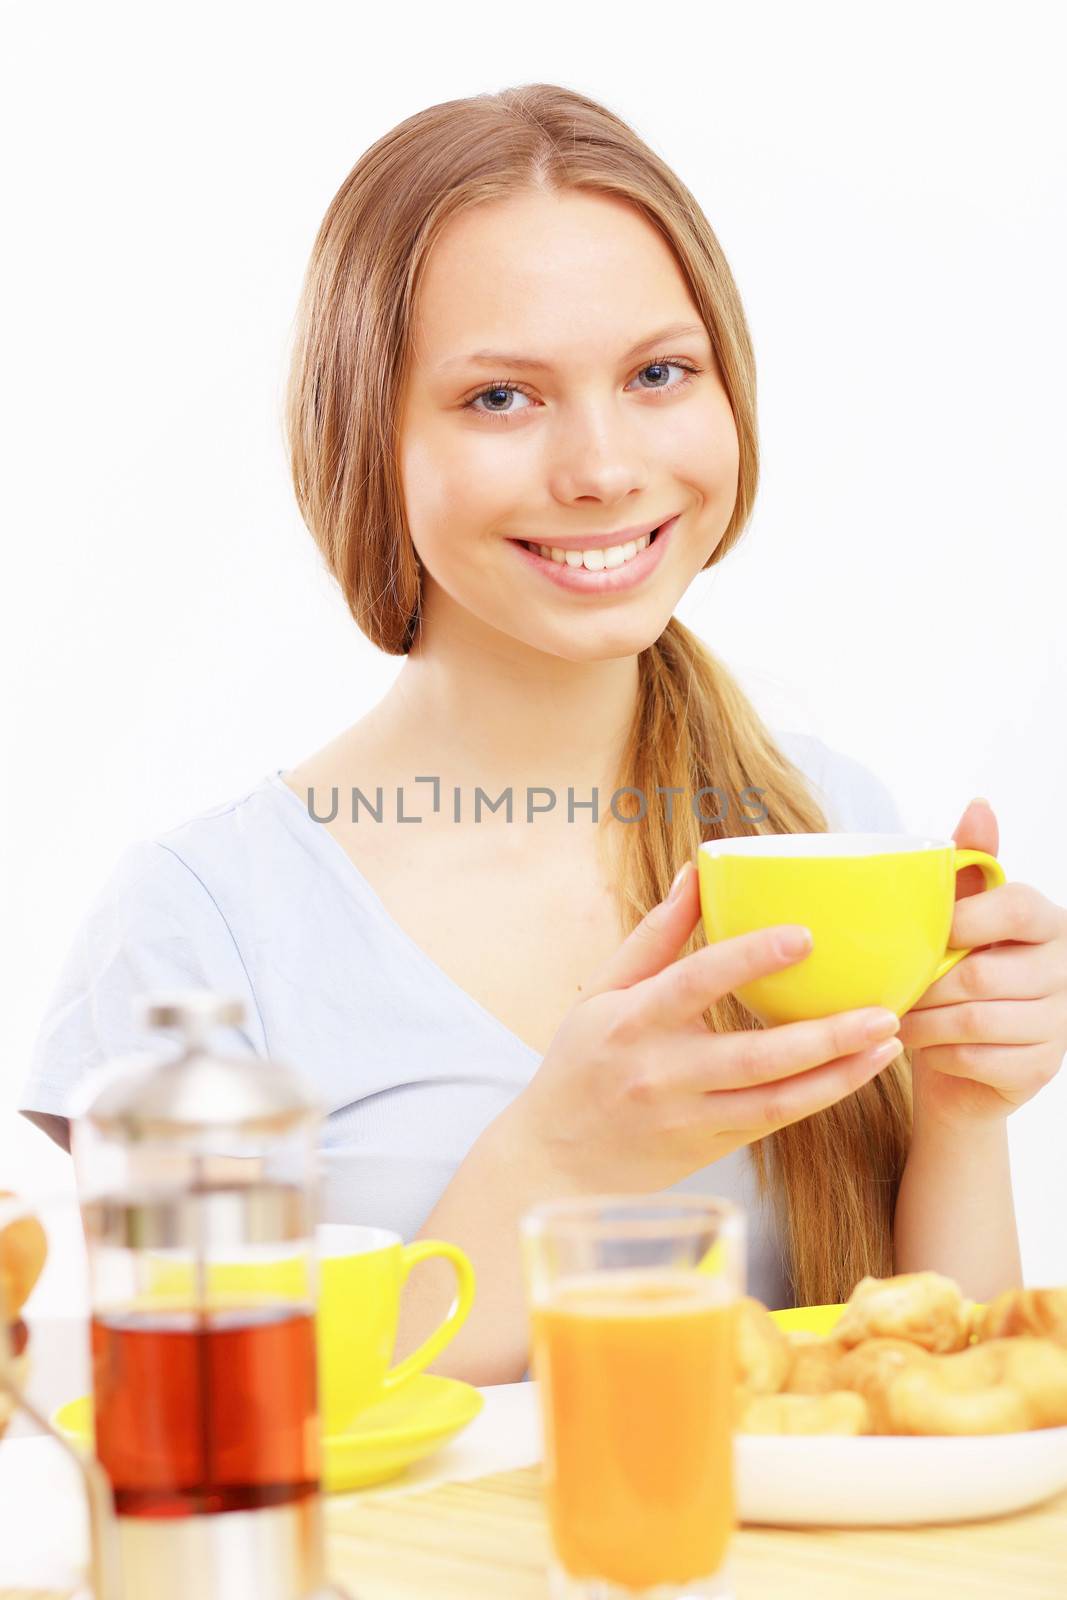 Beautiful young woman drinking tea from yellow cup